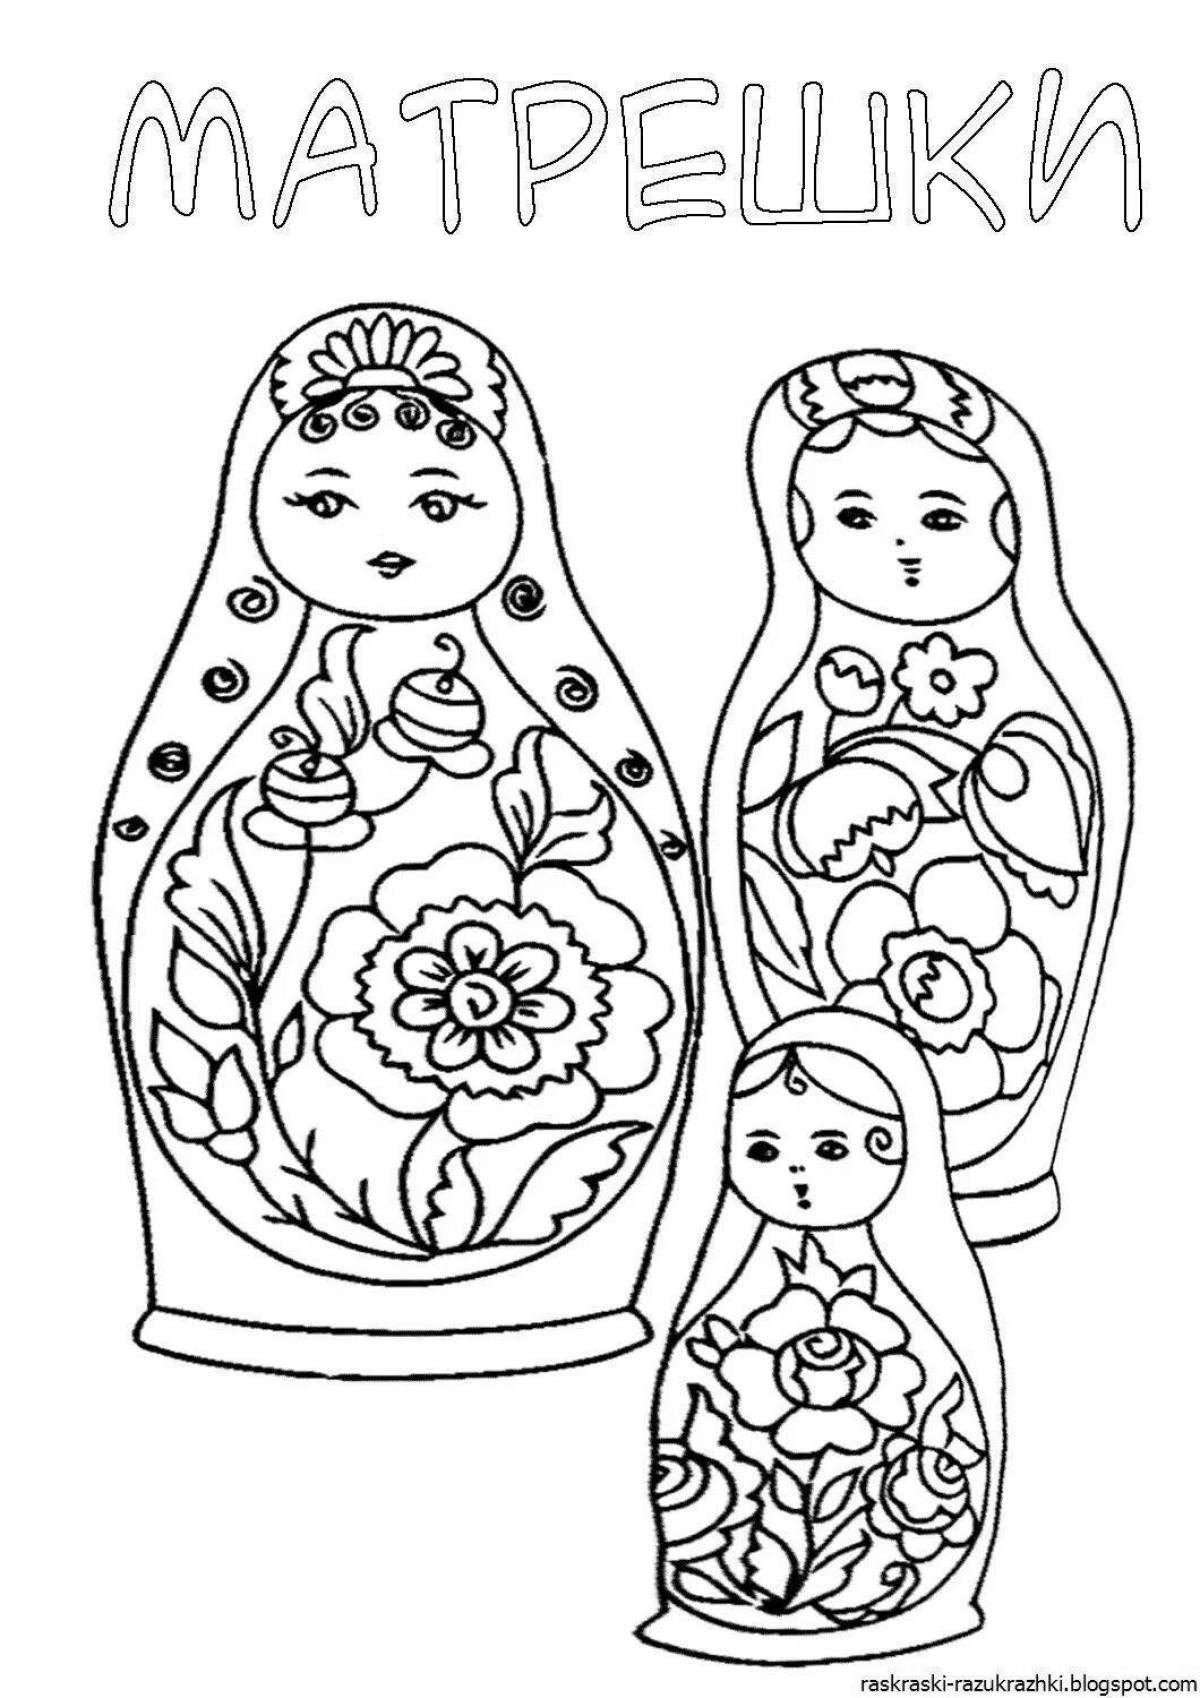 A fun coloring book of folk crafts for kids